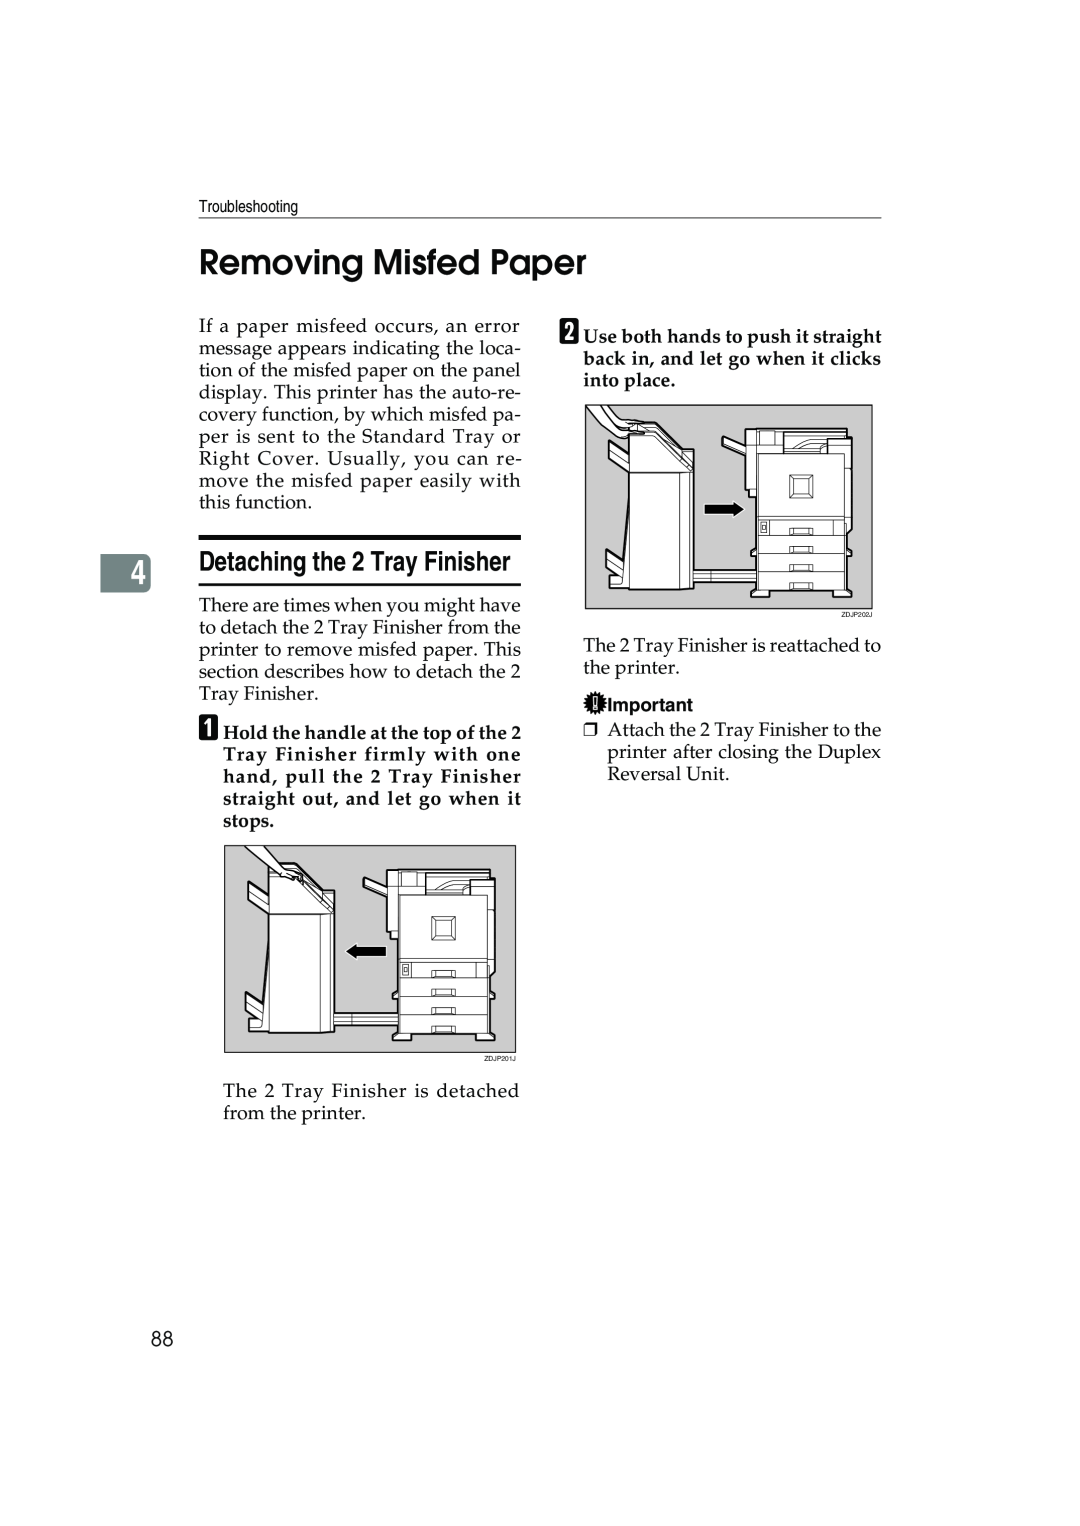 Ricoh AP3800C operating instructions Removing Misfed Paper, Detaching the 2 Tray Finisher 